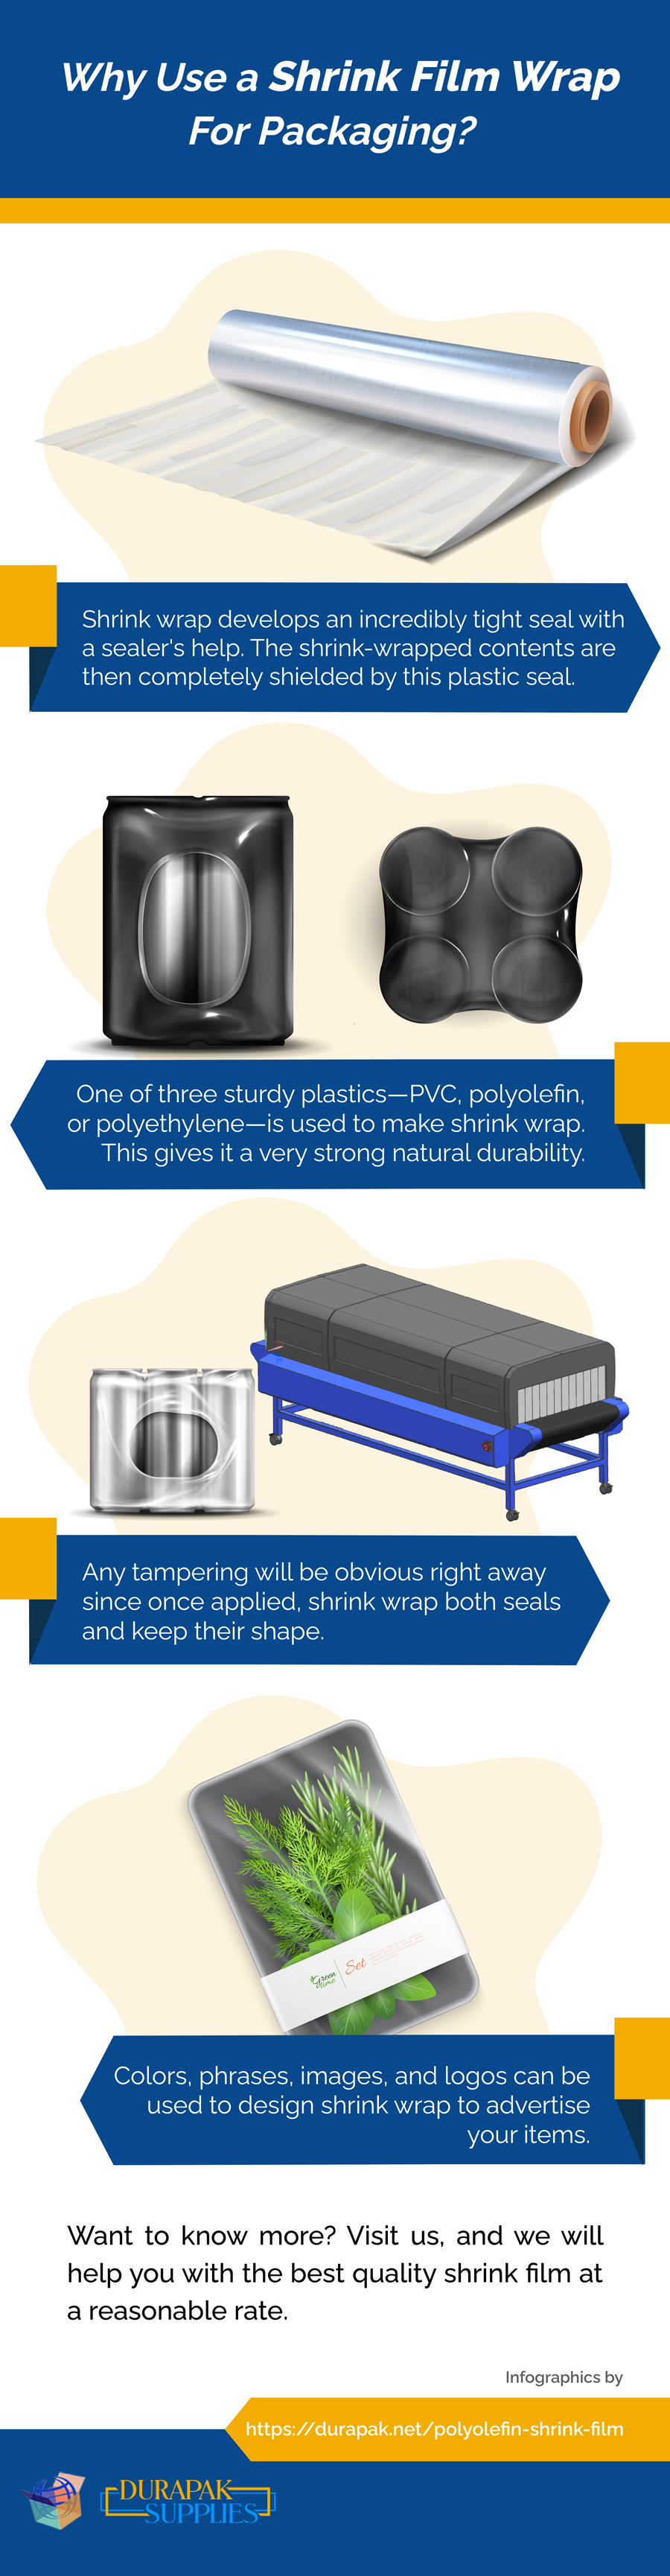 Shrink Plastic Wrapping for Packaging